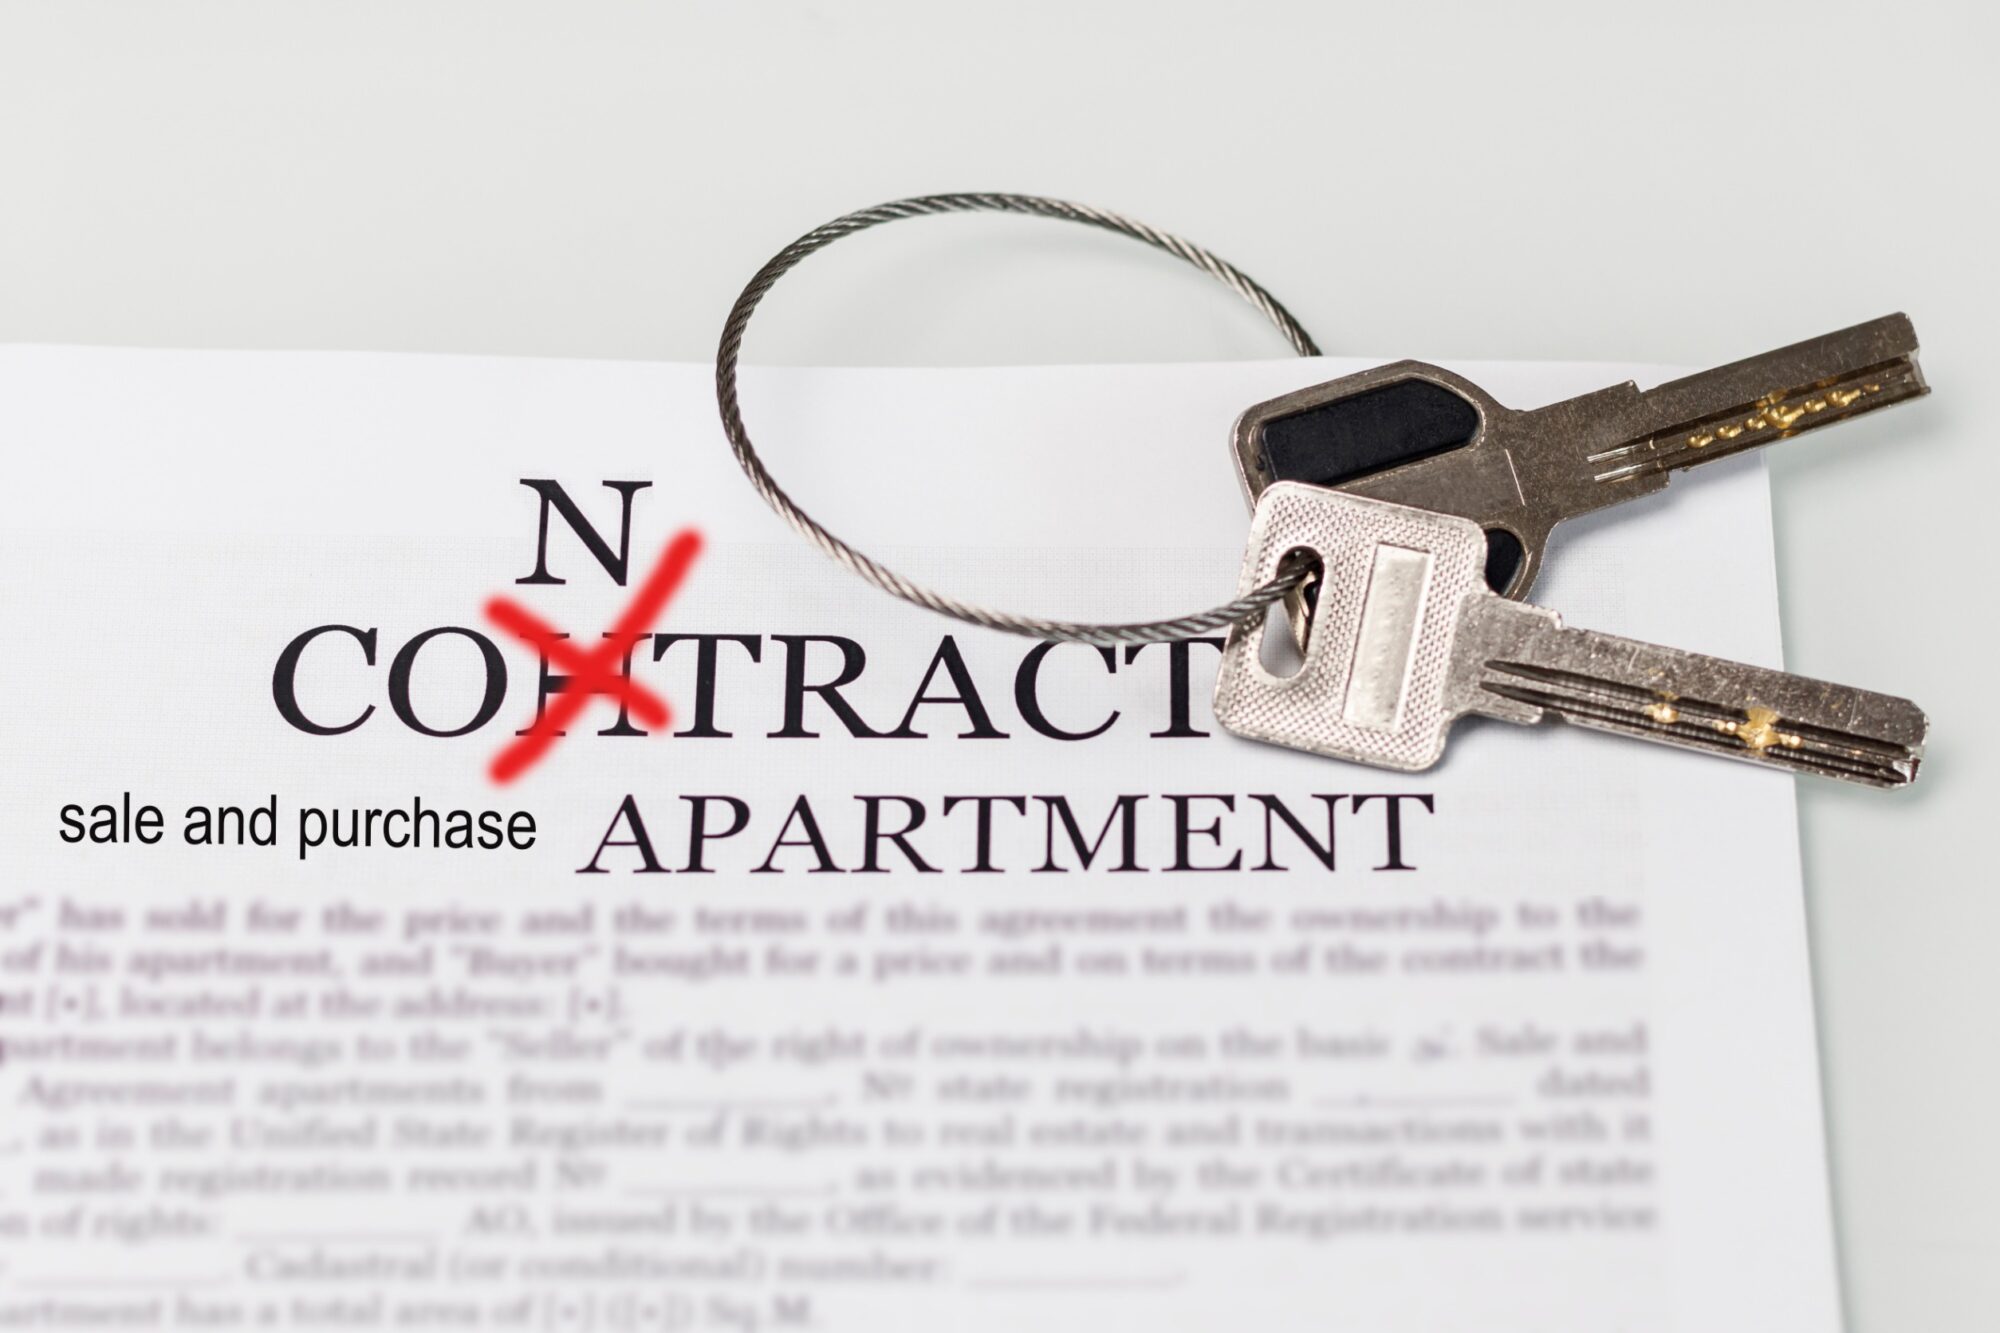 Can the “application fee” paid to rent an apartment be refunded even if the application is canceled?